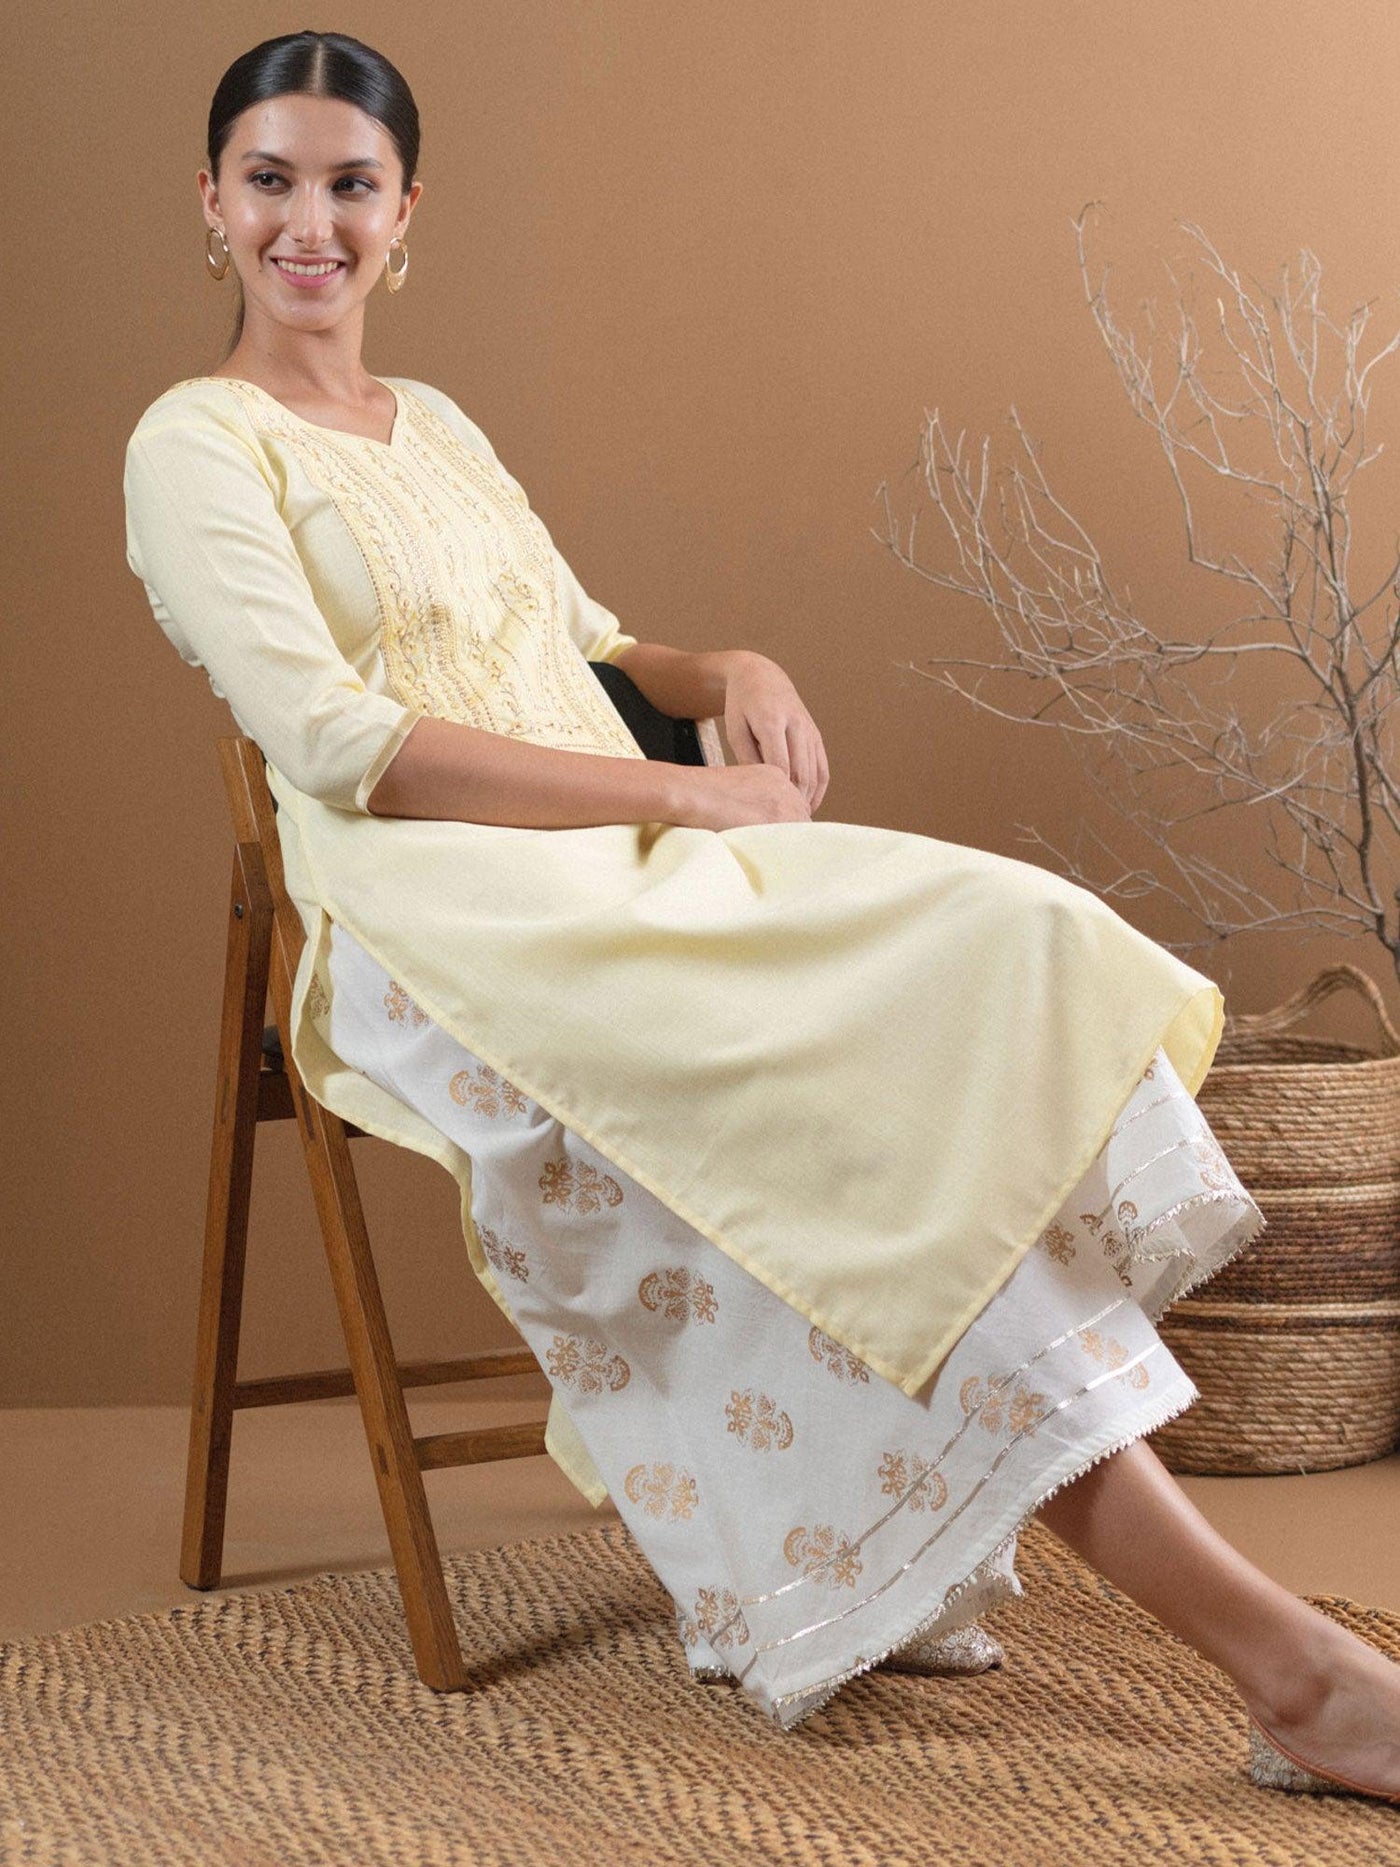 Beige Embroidered Cotton Kurta With Mask - Libas